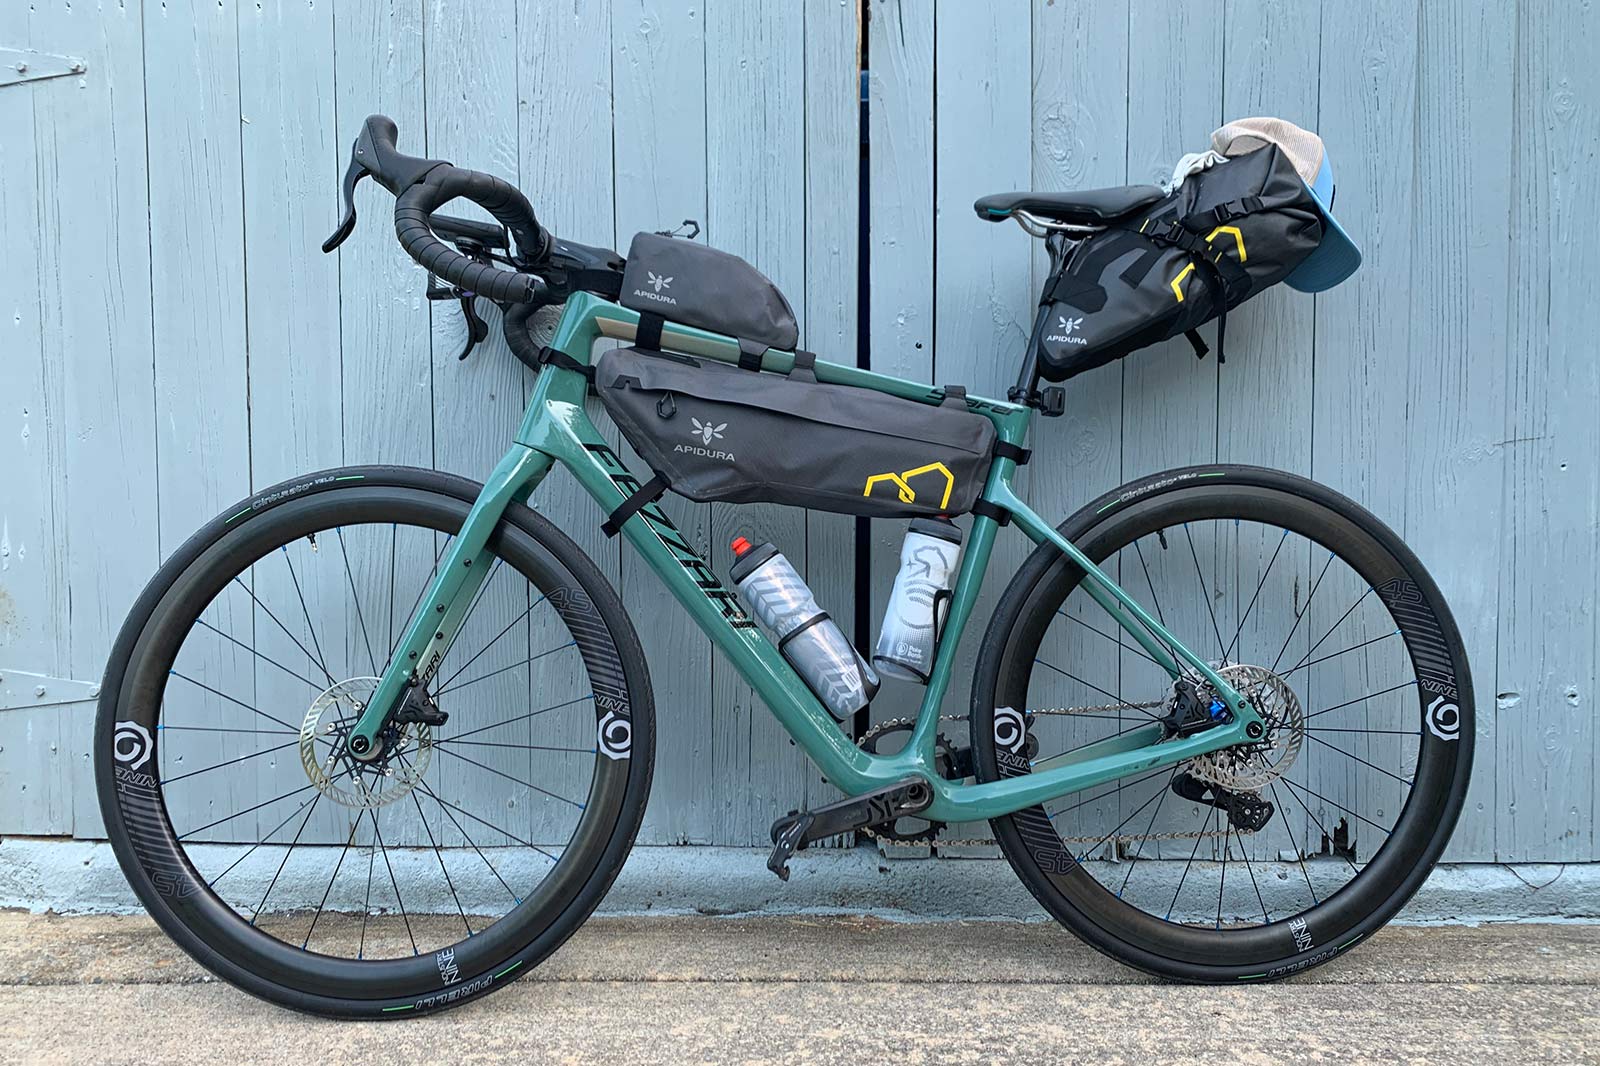 apidura expedition bikepacking bags installed on a gravel bike